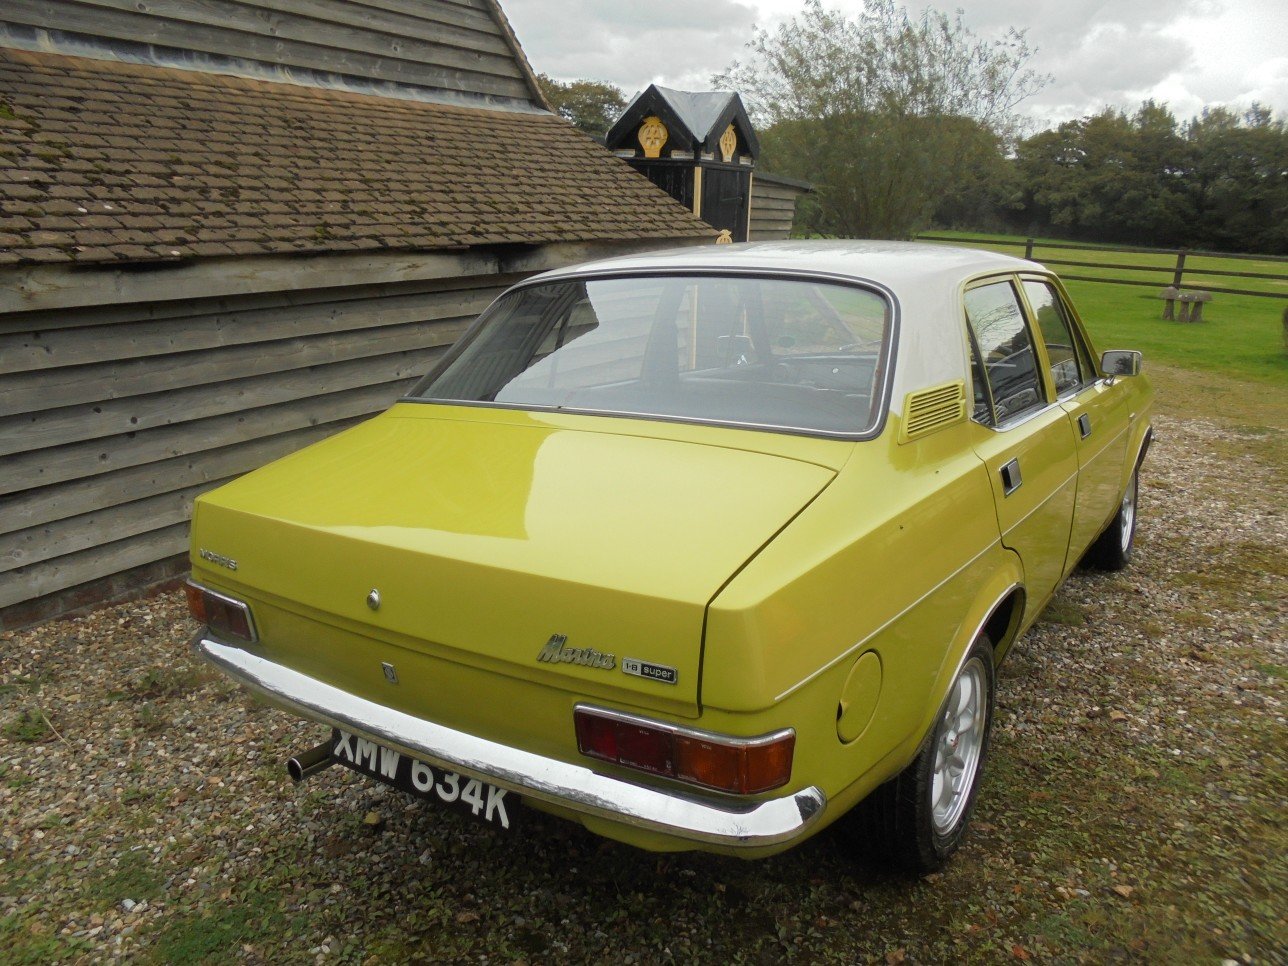 The 1971 Morris Marina was only meant to be on sale for five years. How long did it ultimately last?